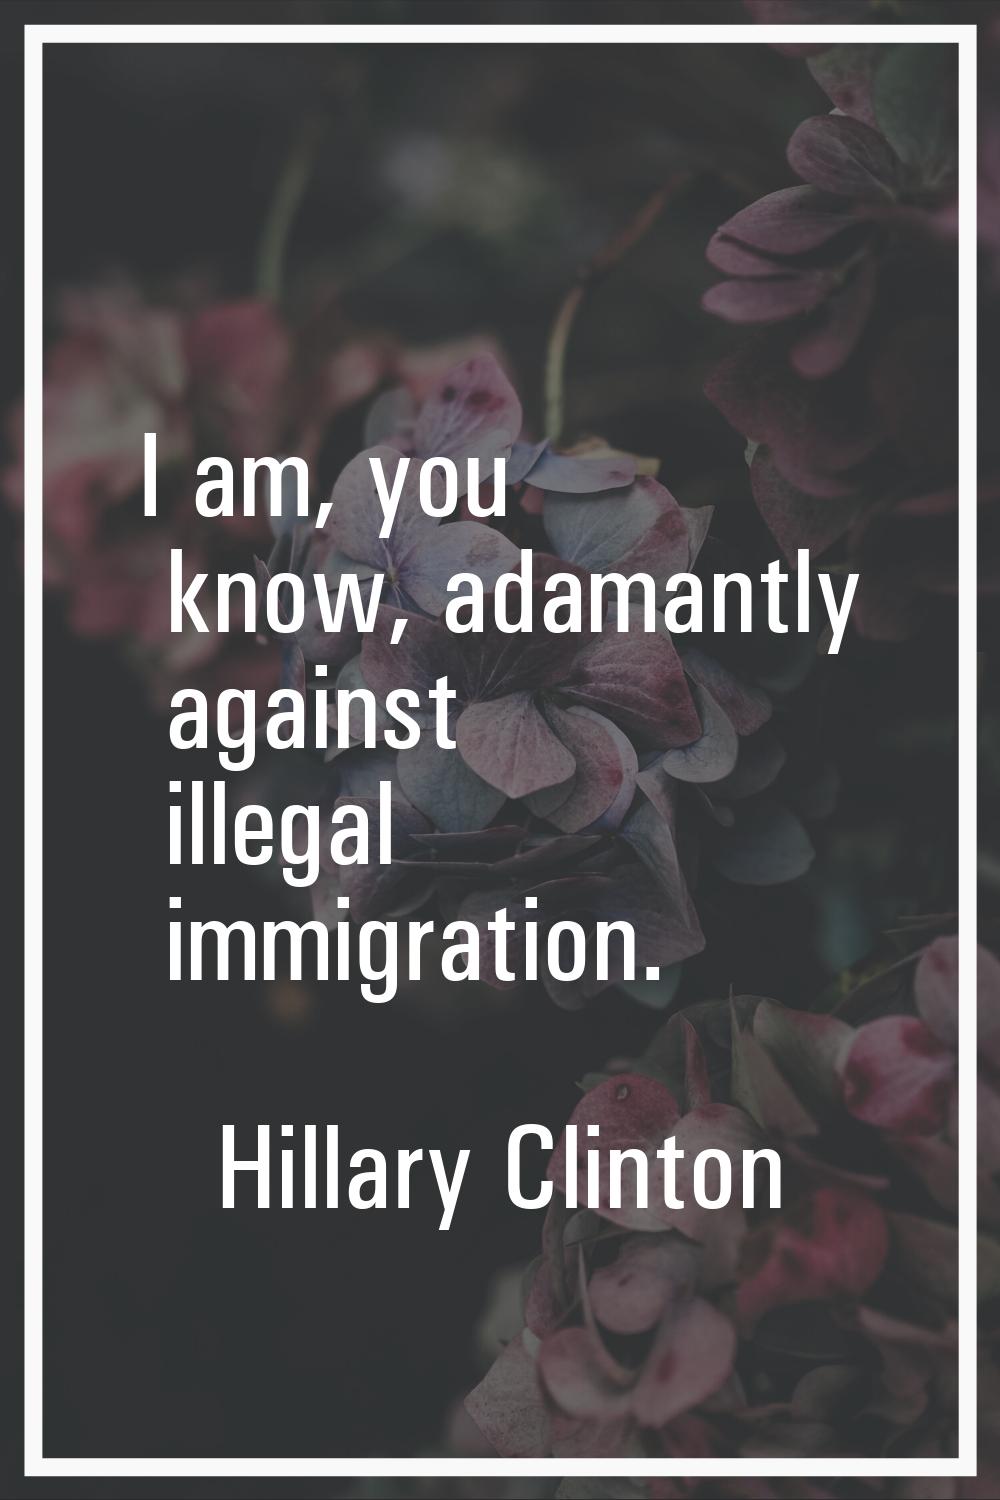 I am, you know, adamantly against illegal immigration.